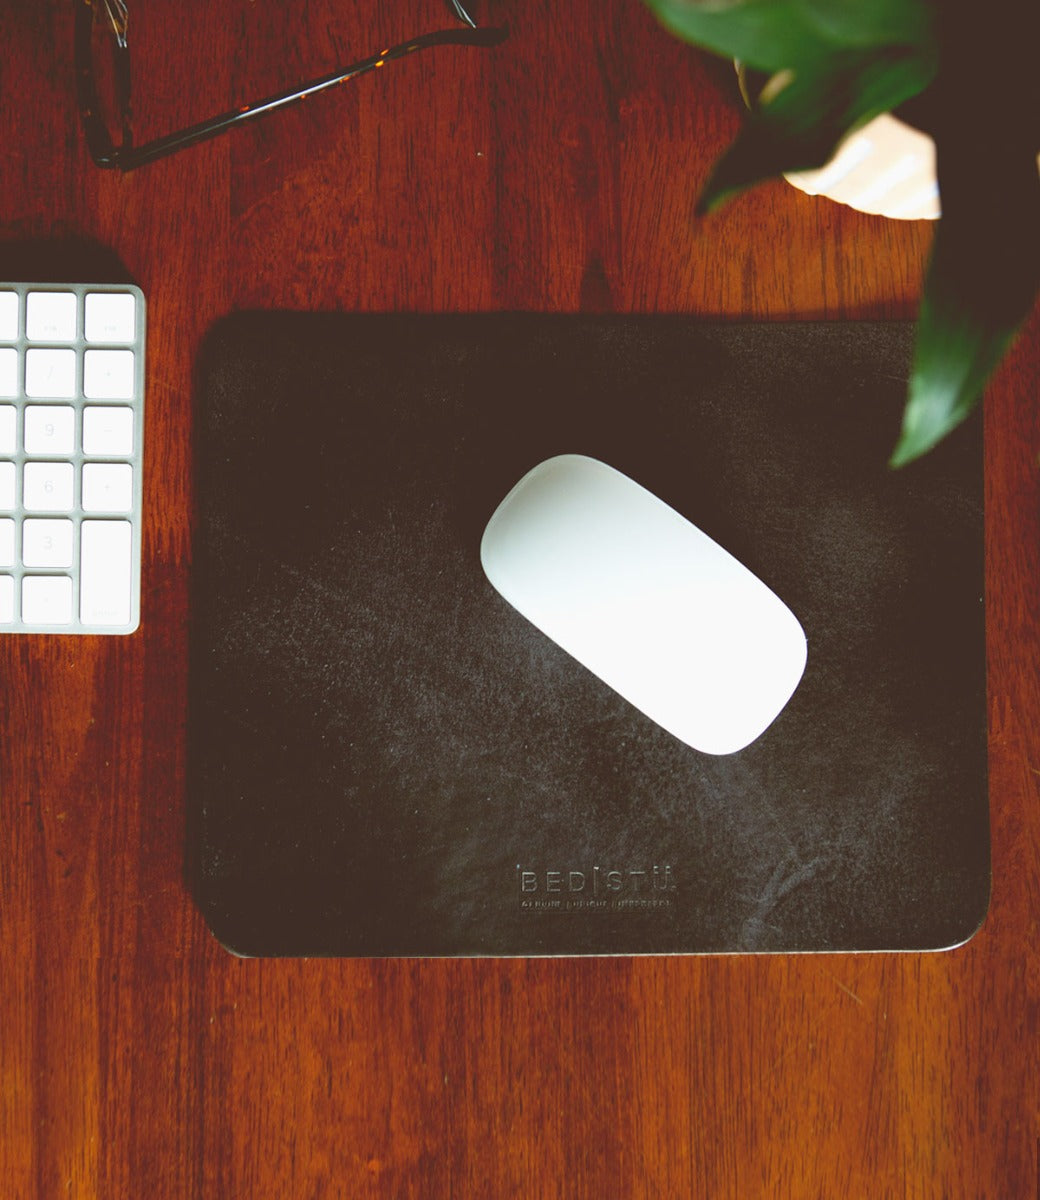 A black Launcher mouse pad on a wooden desk. (Brand Name: Bed Stu)